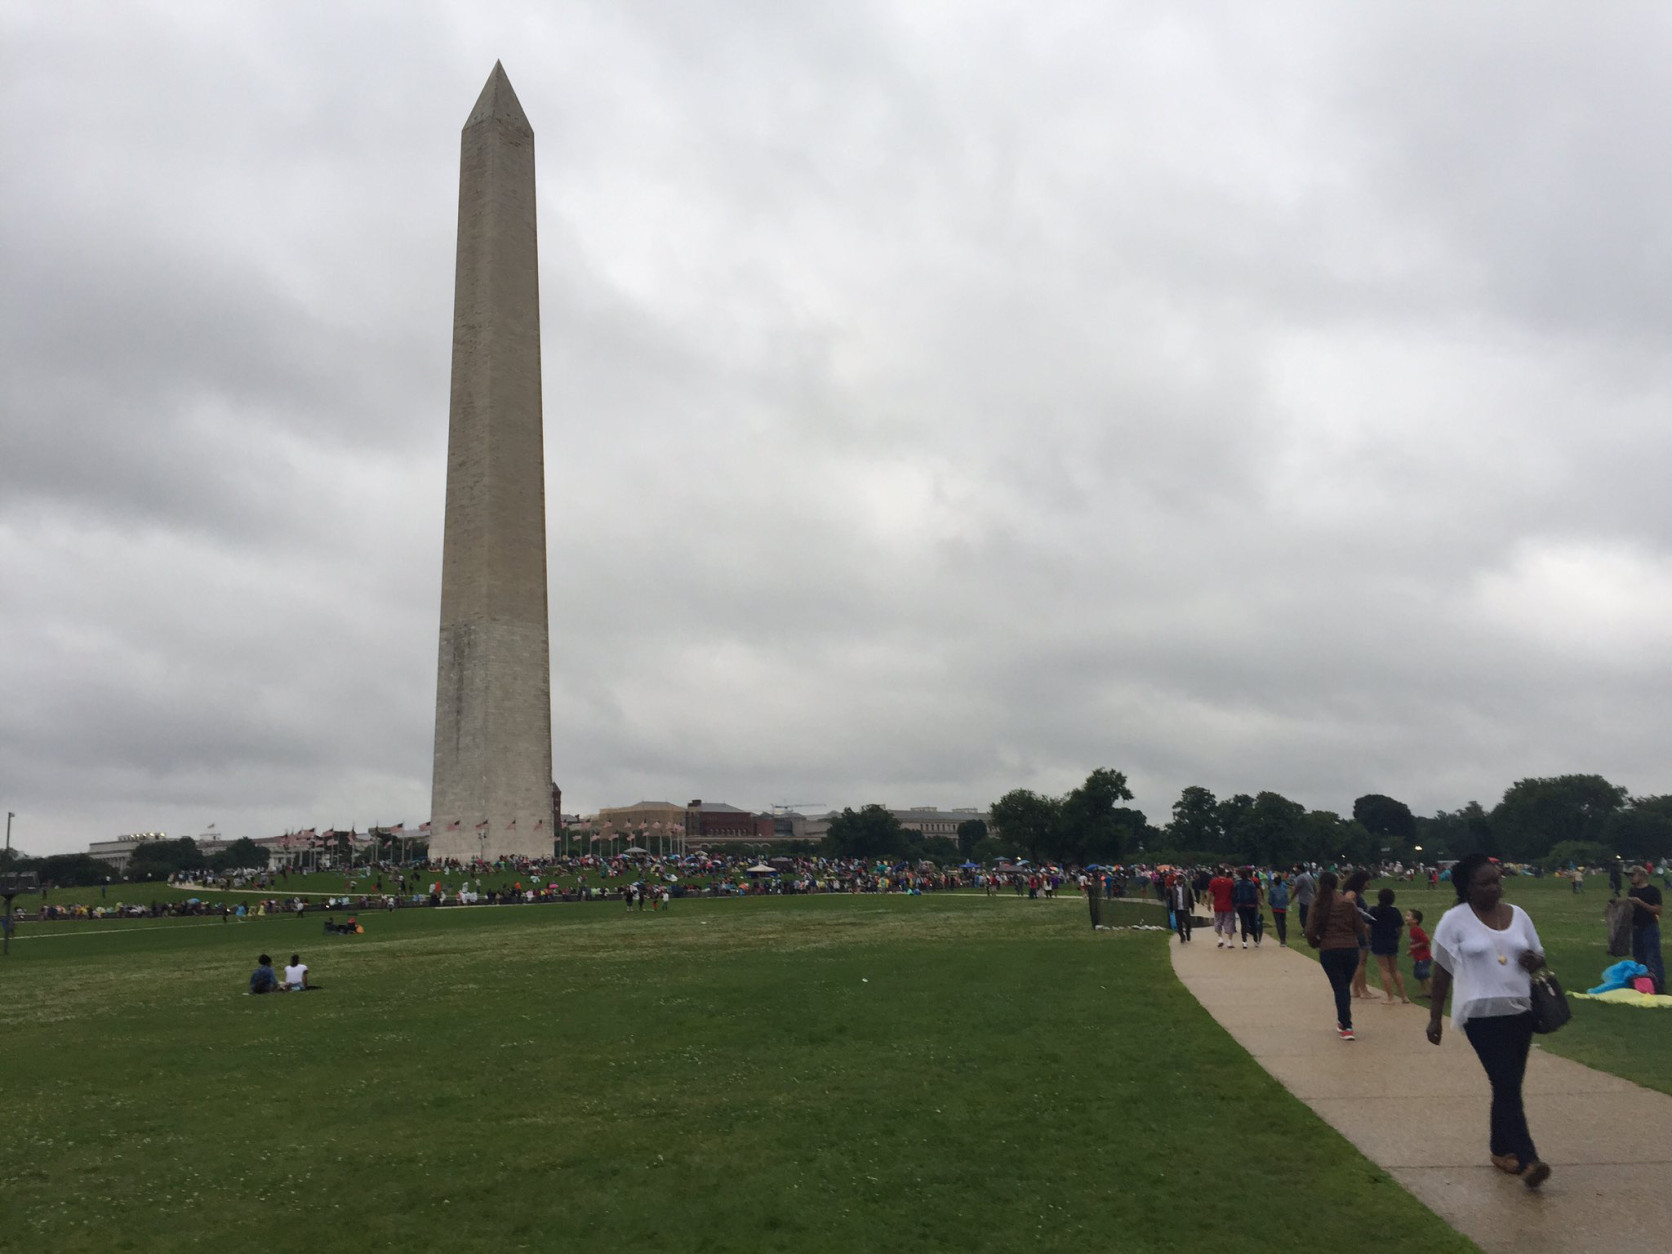 The Washington Monument is seen as crowds gathered in early July. (WTOP/Michelle Basch)